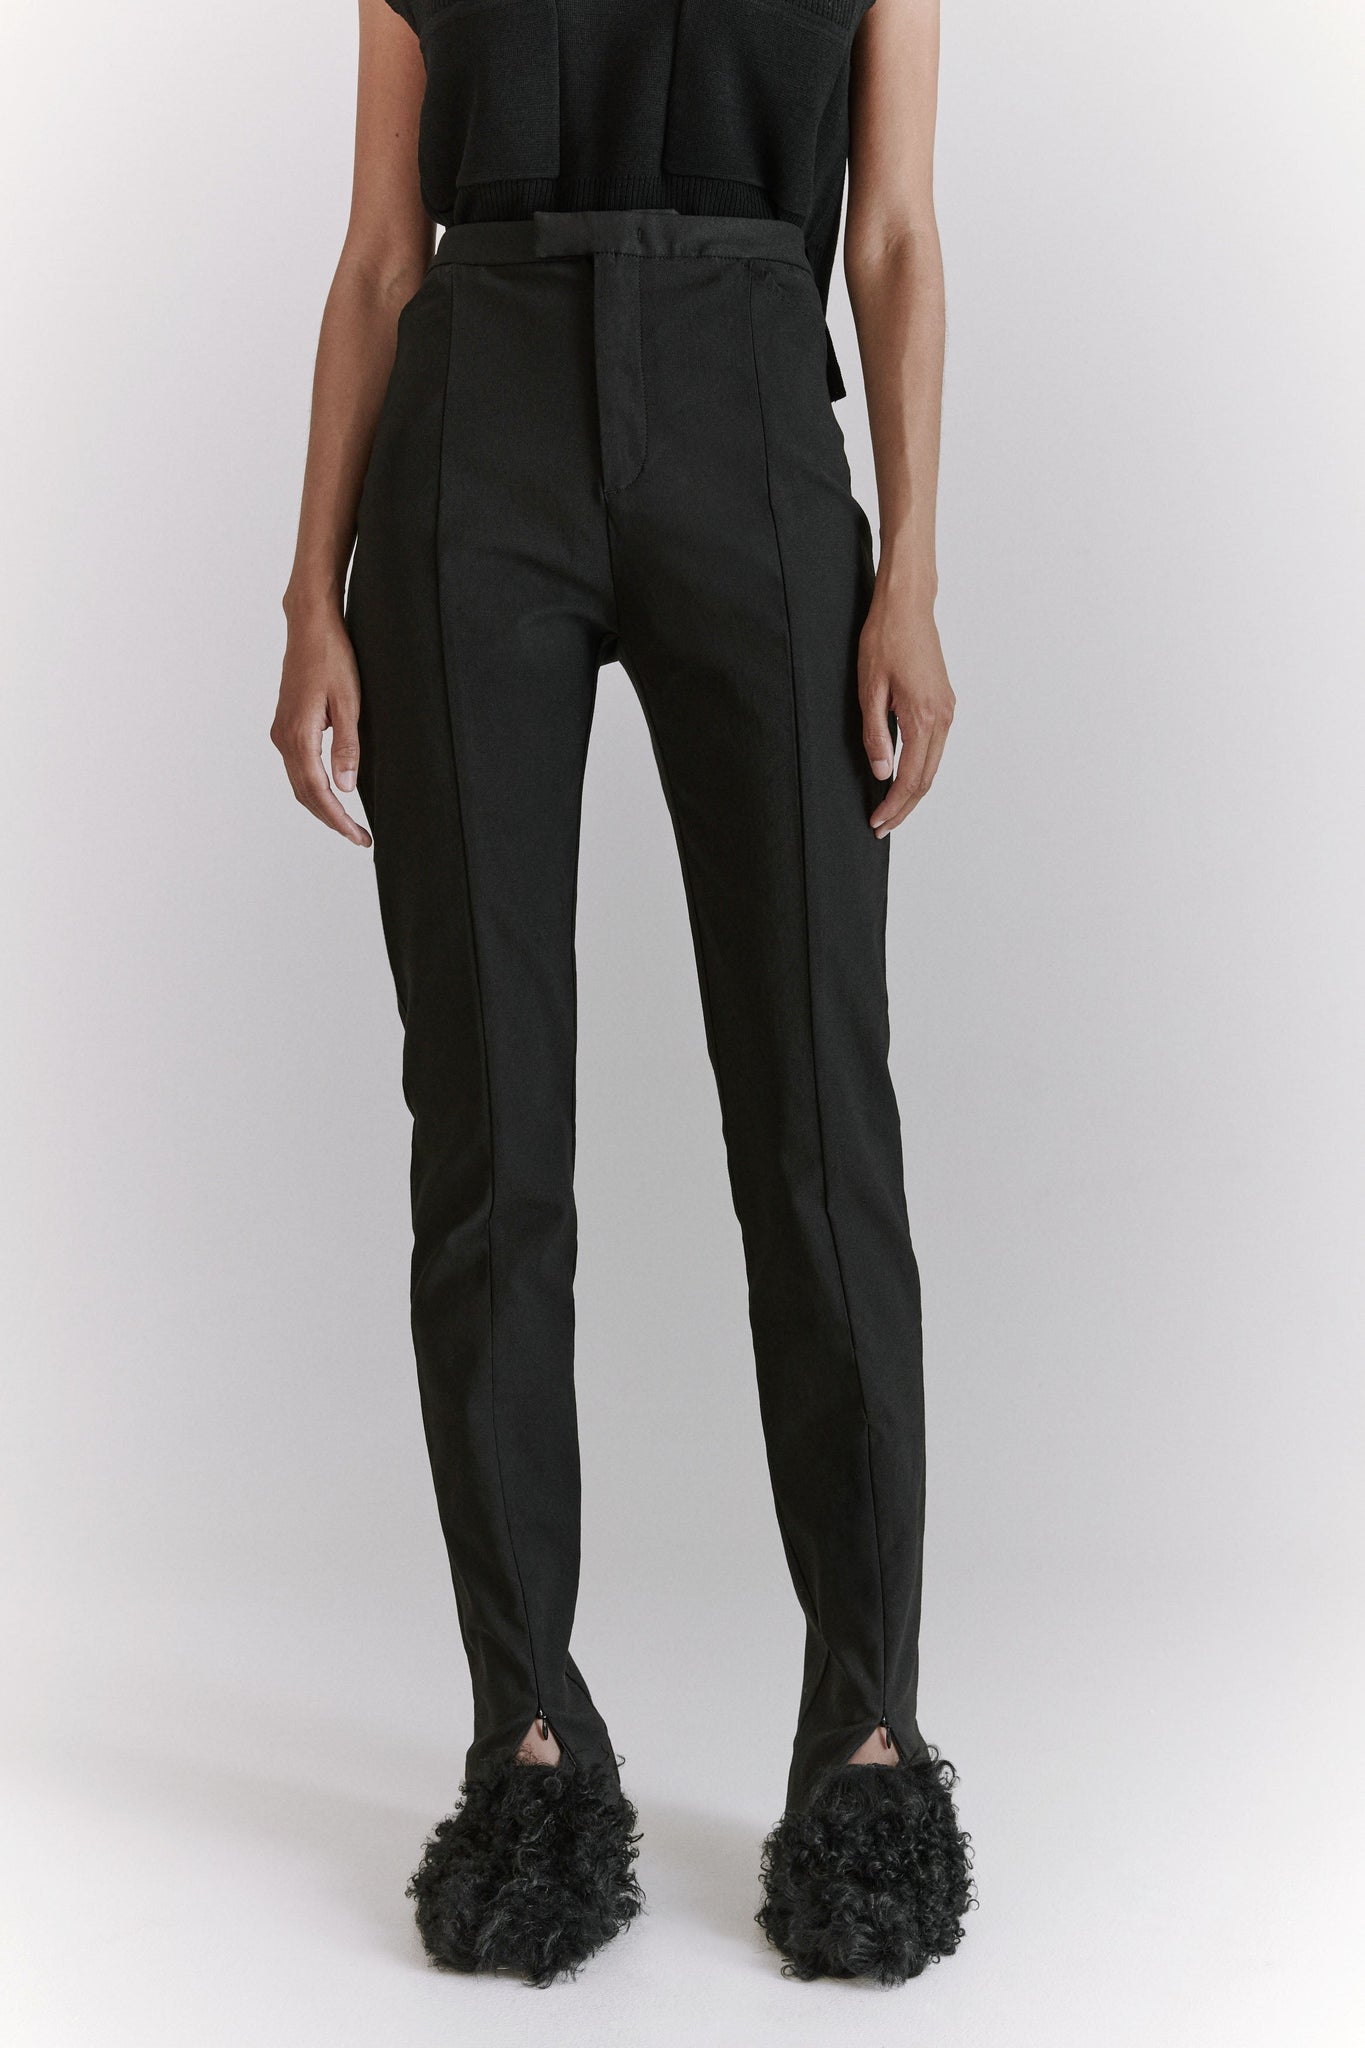 Sharp trousers by Hope - black